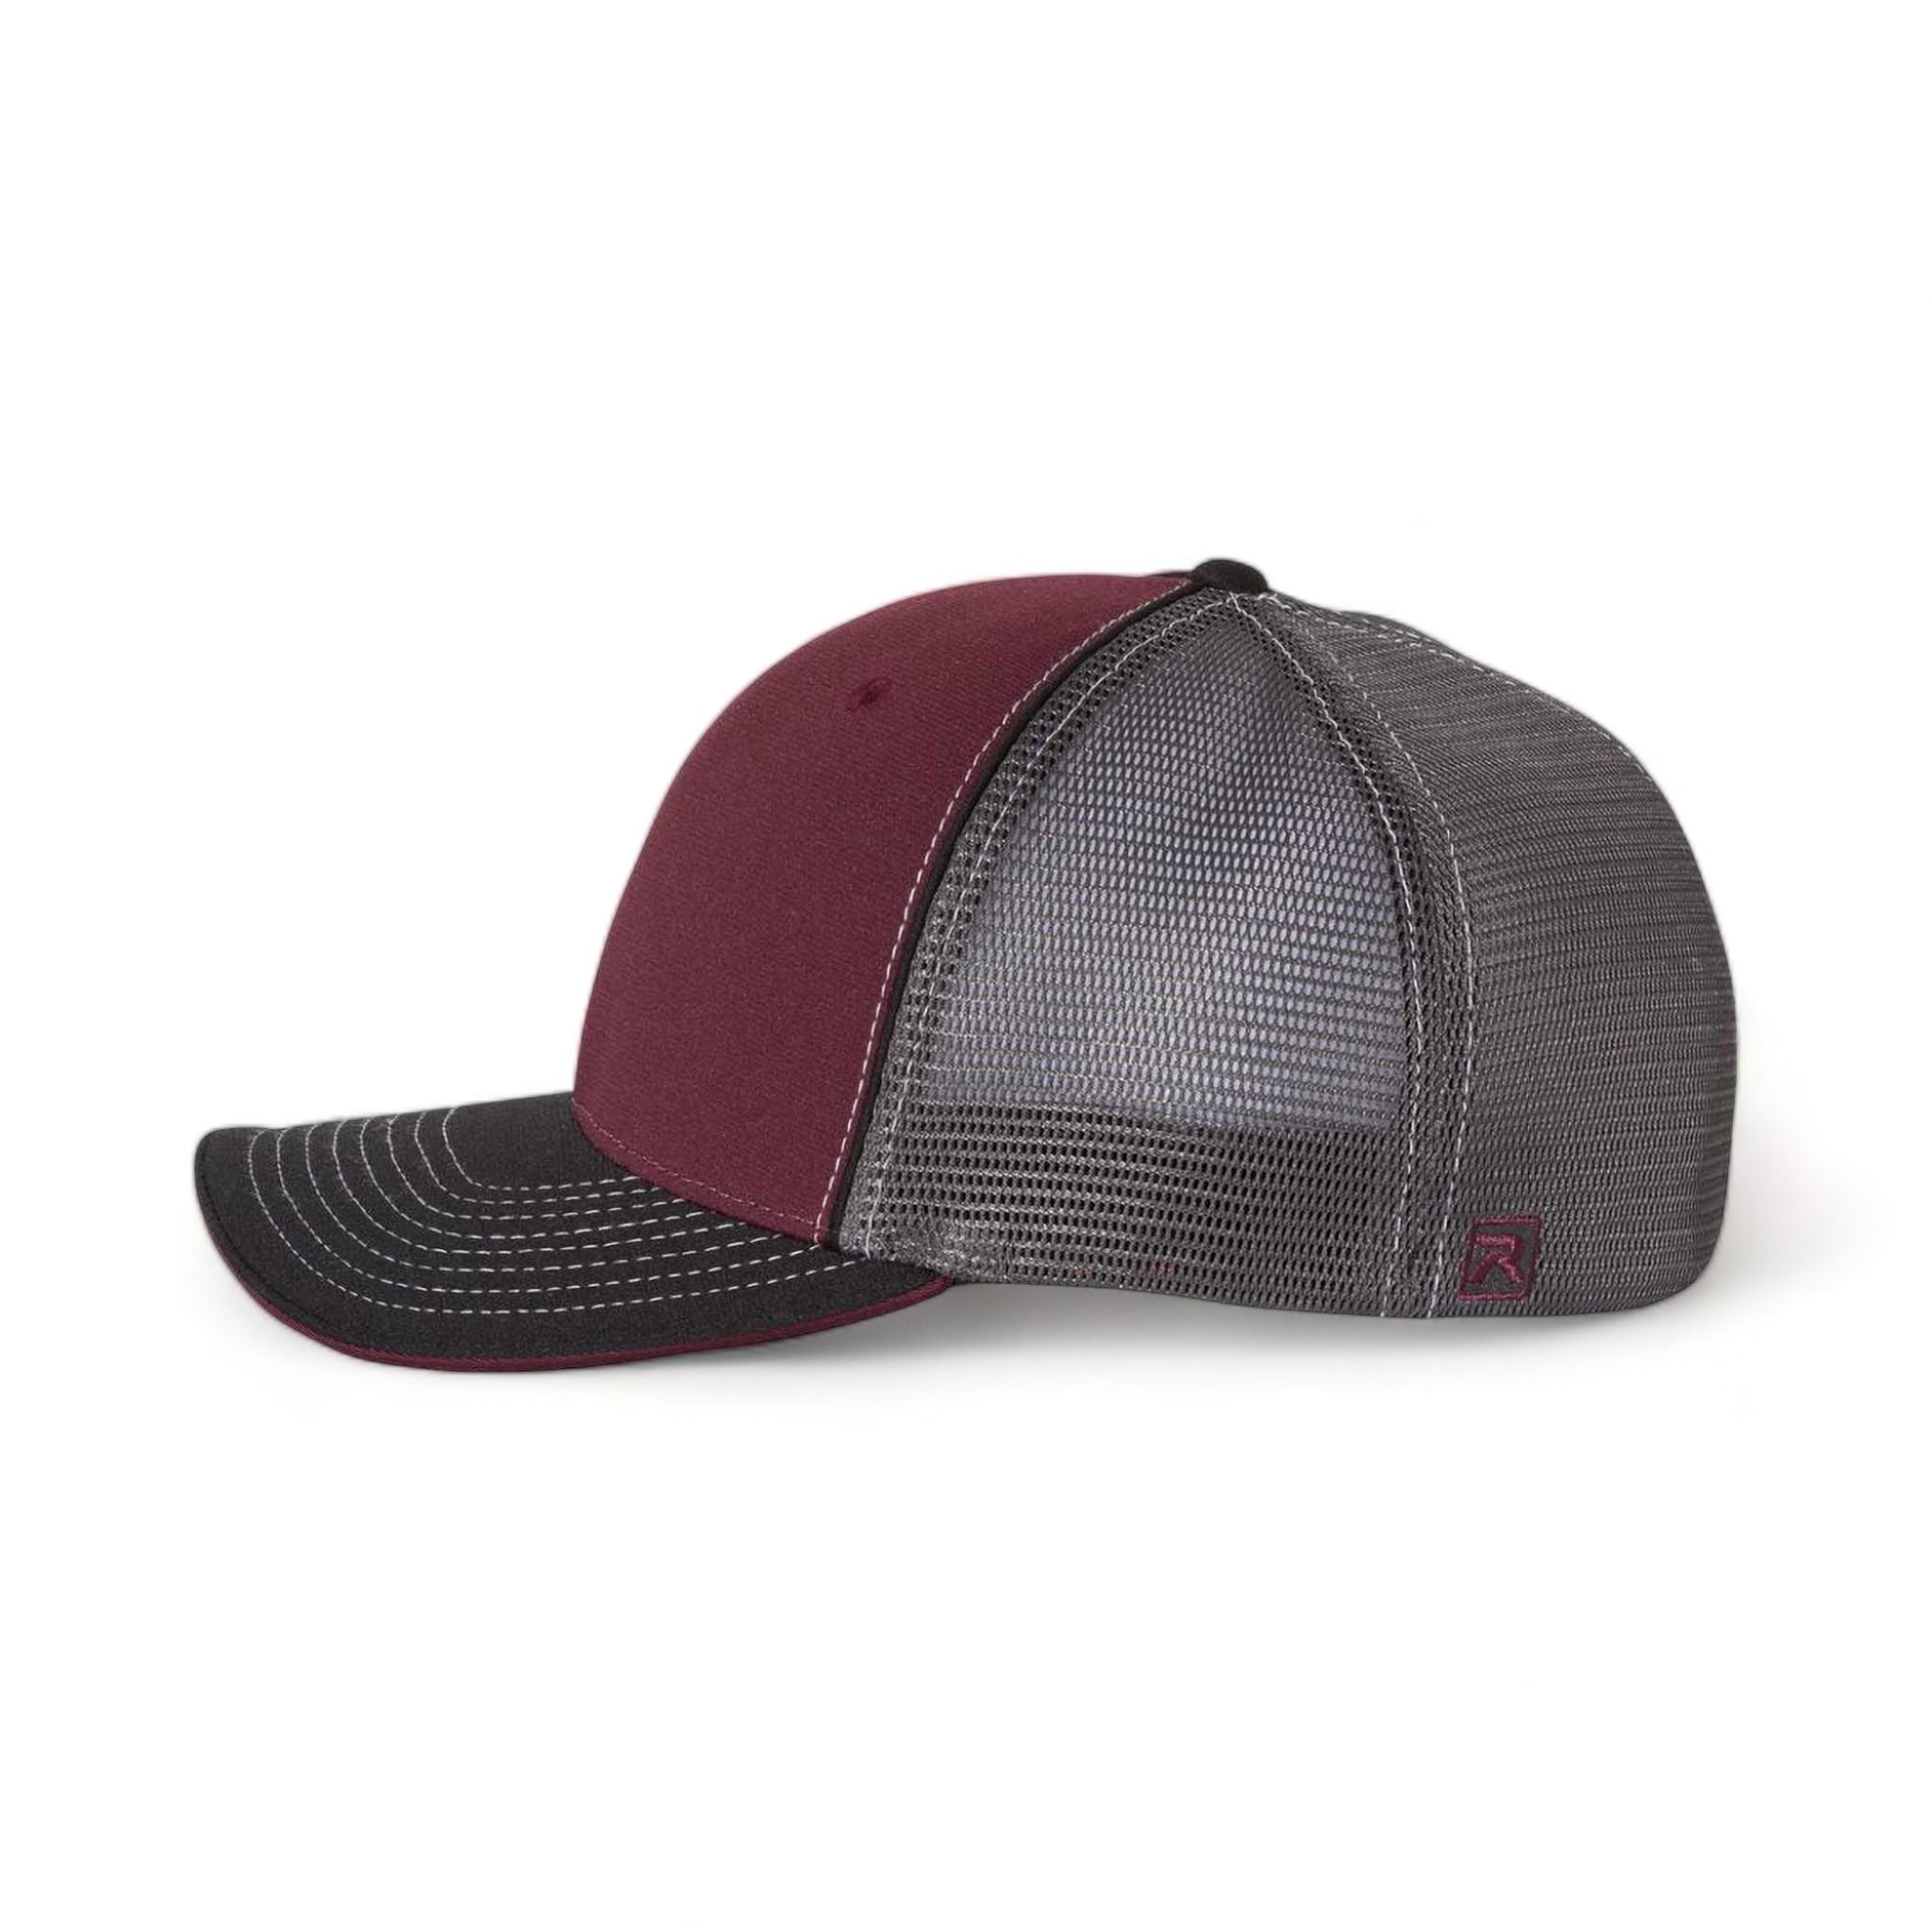 Side view of Richardson 172 custom hat in maroon, charcoal and black tri